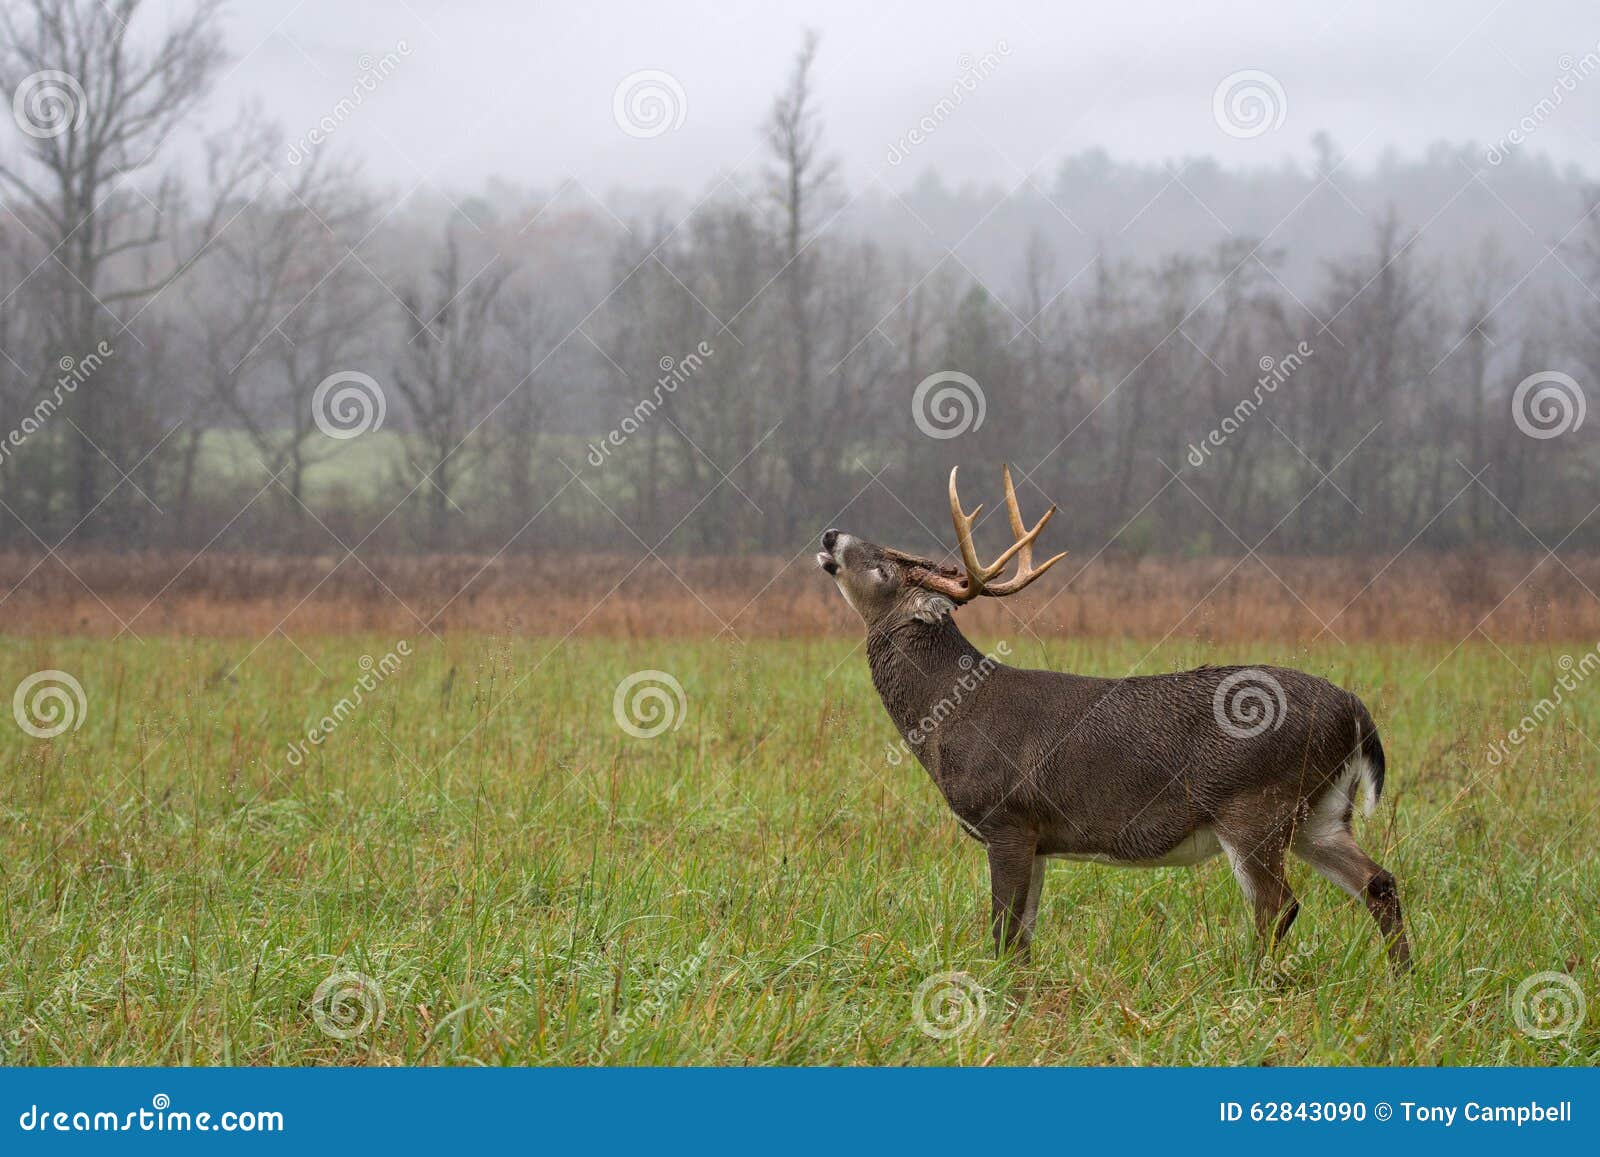 White-tailed deer buck in rain. Large white-tailed deer buck standing in an open meadow during a rain storm in Smoky Mountain National Park